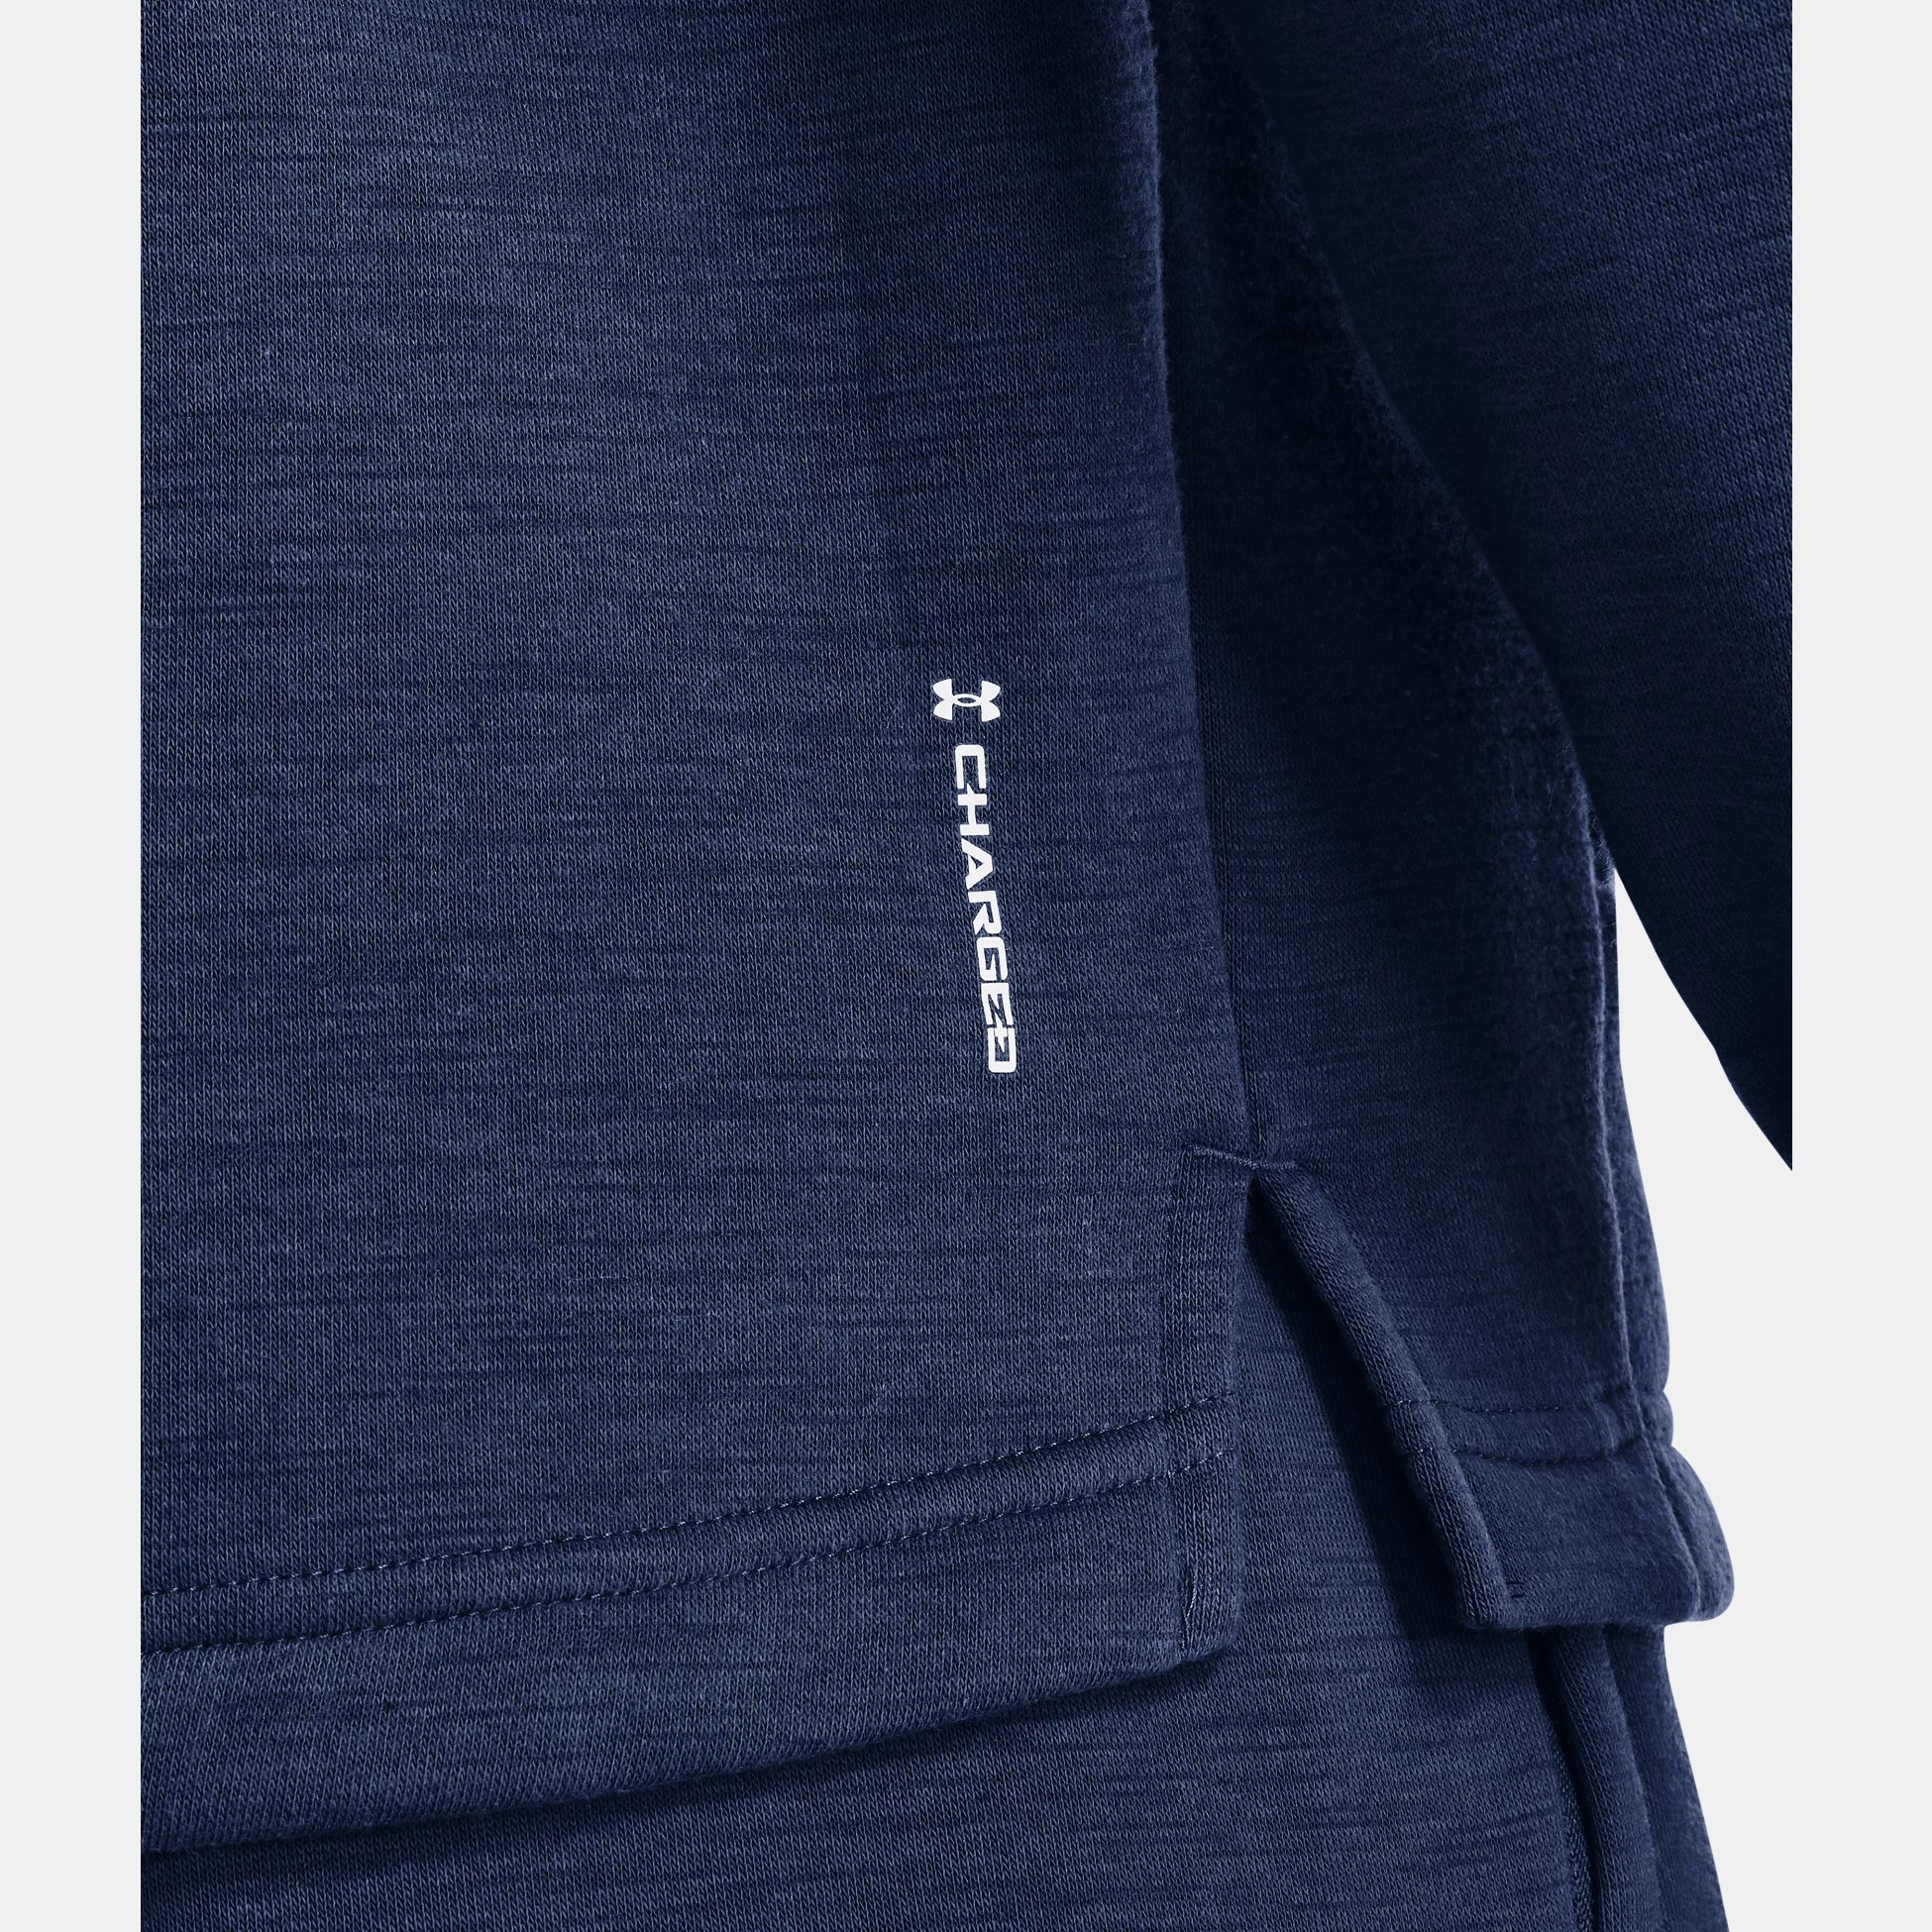 Bluze -  under armour Project Rock Charged Cotton Fleece Hoodie